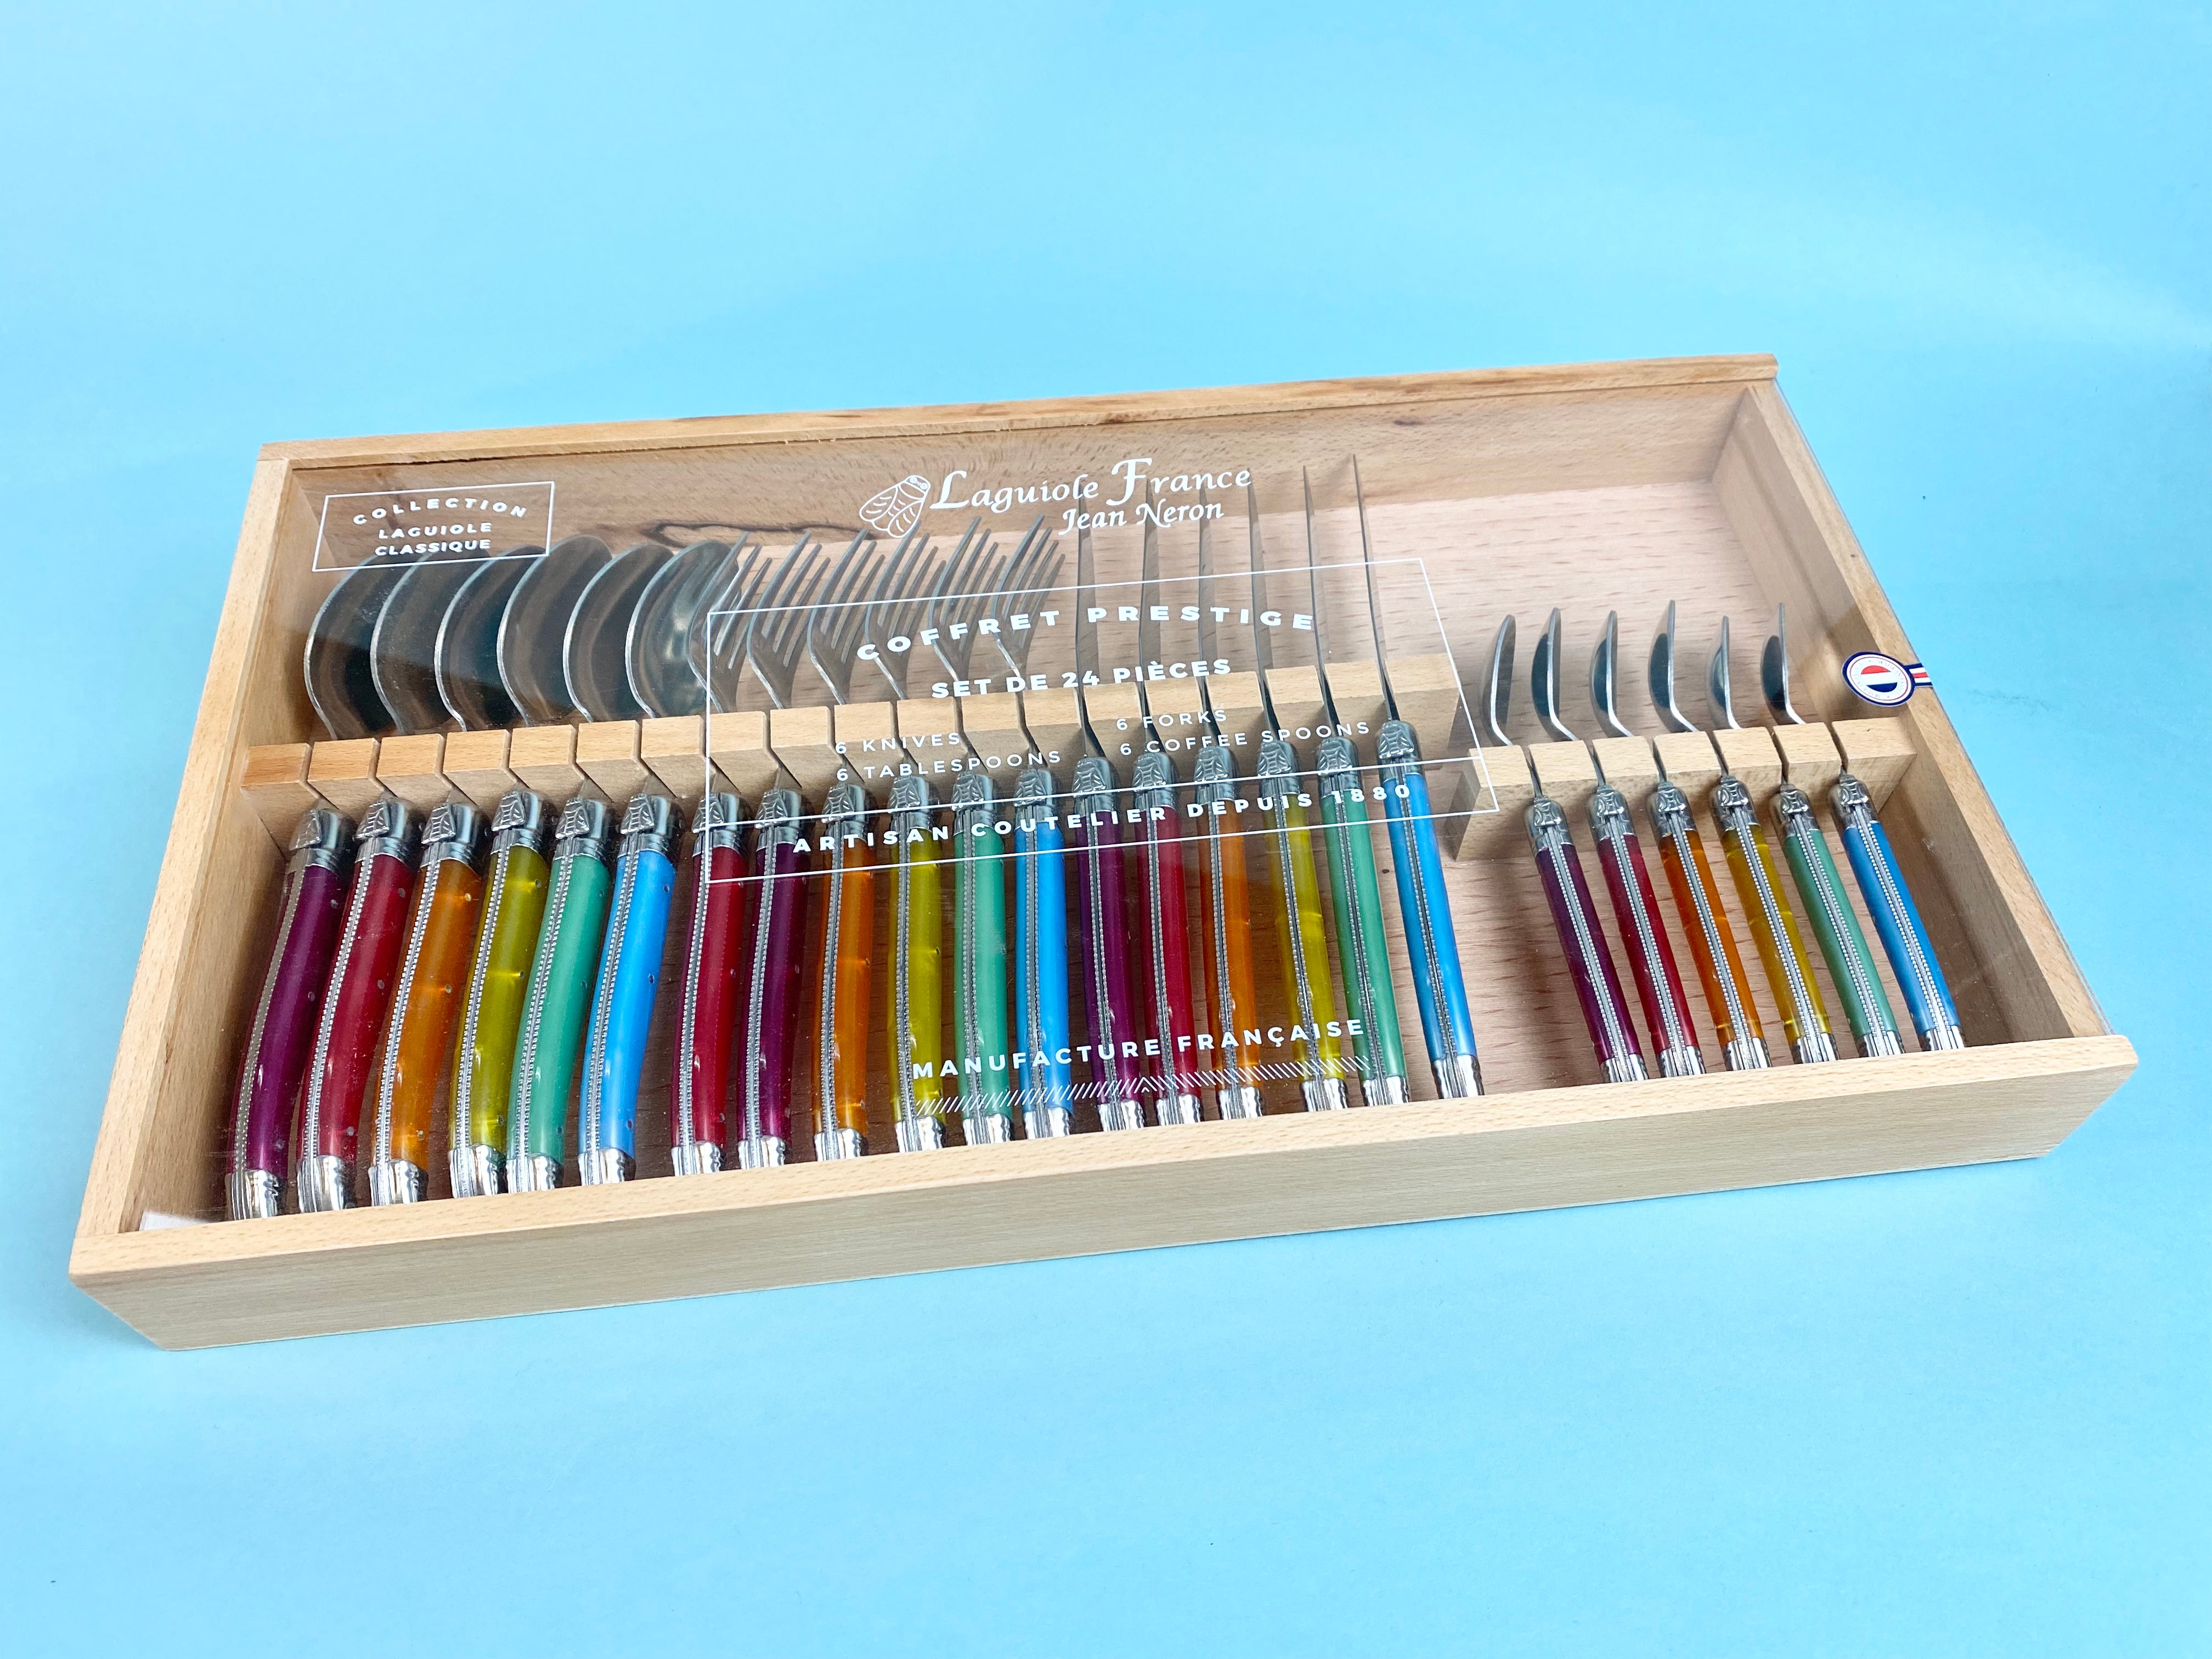 Laguiole Rainbow Flatware in Wooden Box with Acrylic Lid (Set of 24) Cutlery Set Laguiole Brand_Laguiole Cheese Sets Kitchen_Dinnerware Laguiole Loose Mini Rainbow Utensils 790054000WNAL